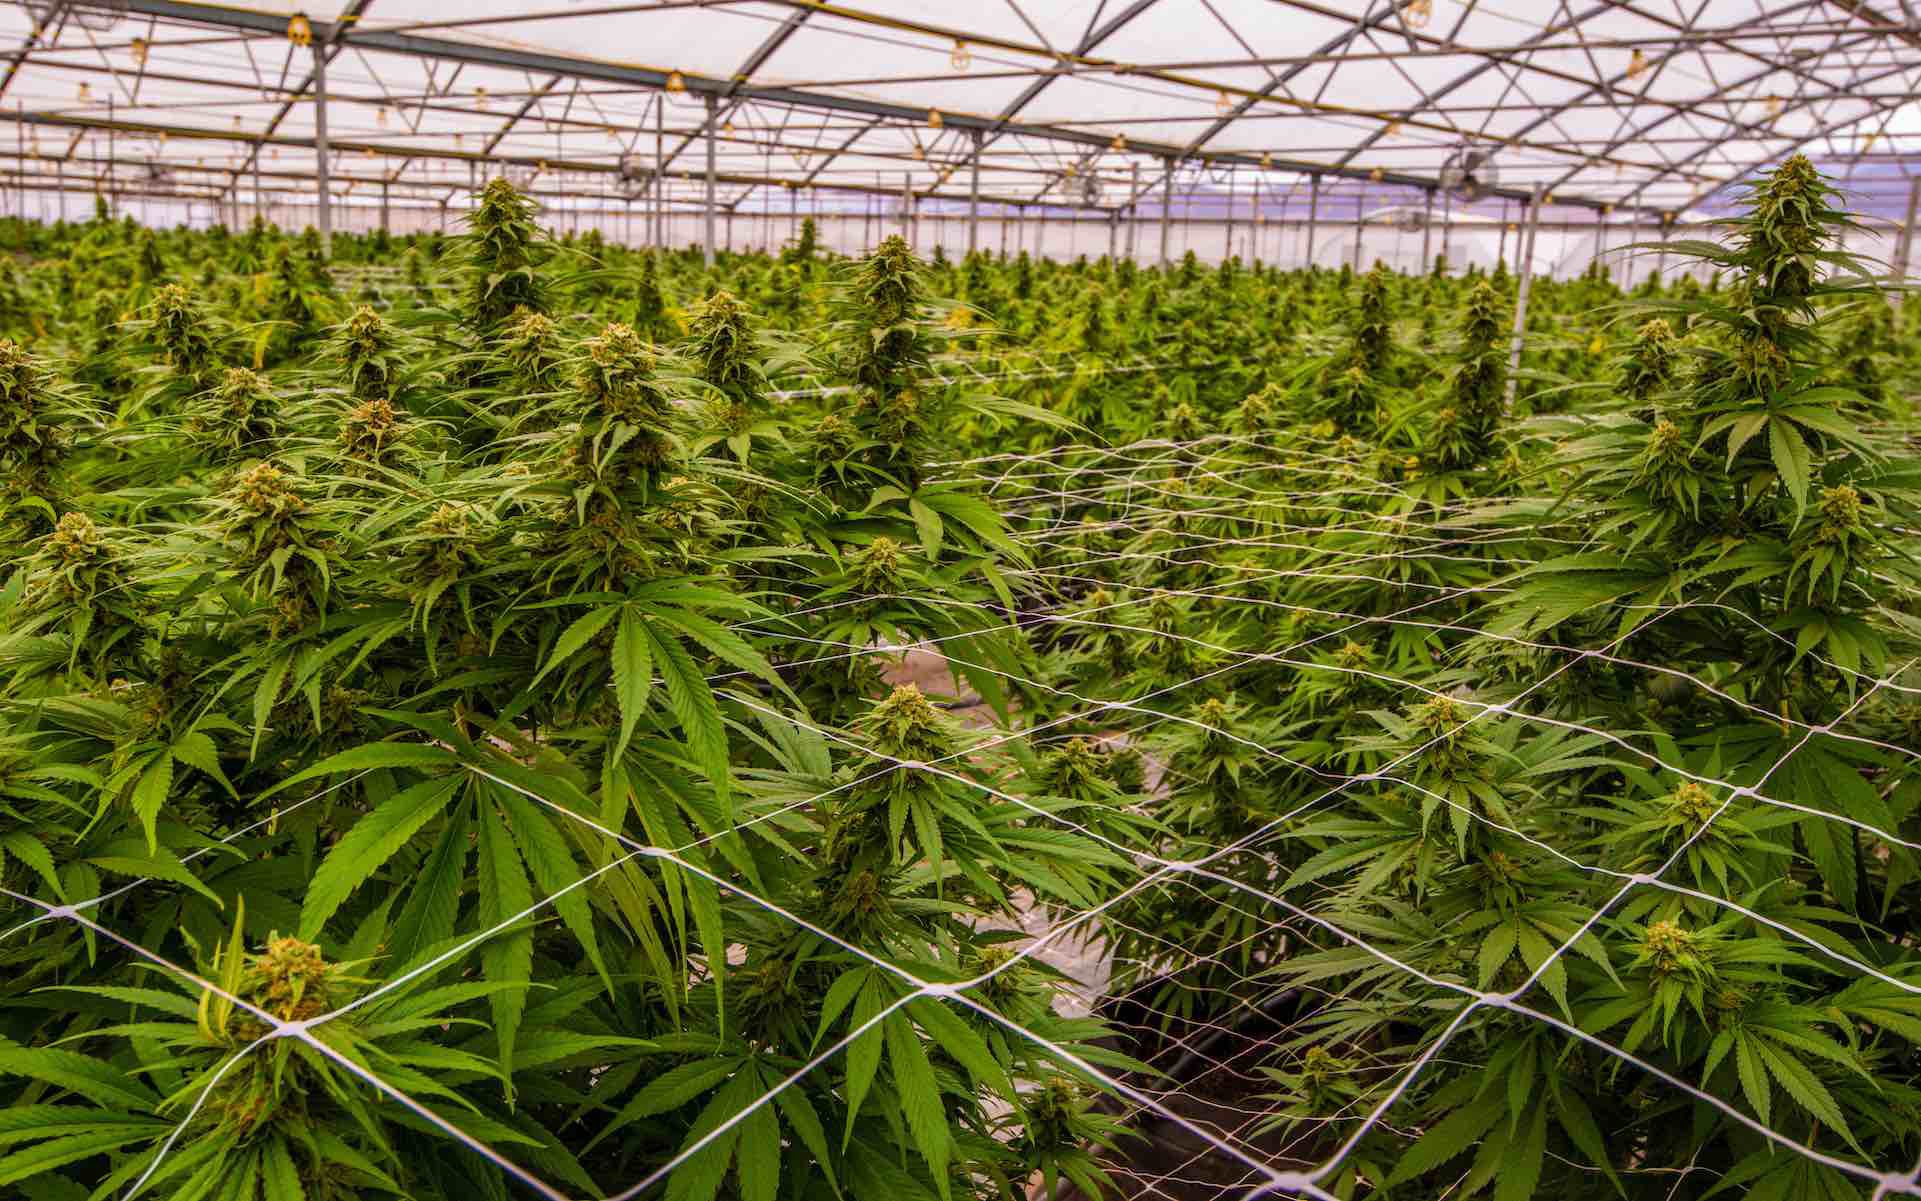 Where's a better environment to grow weed: indoors or outdoors?